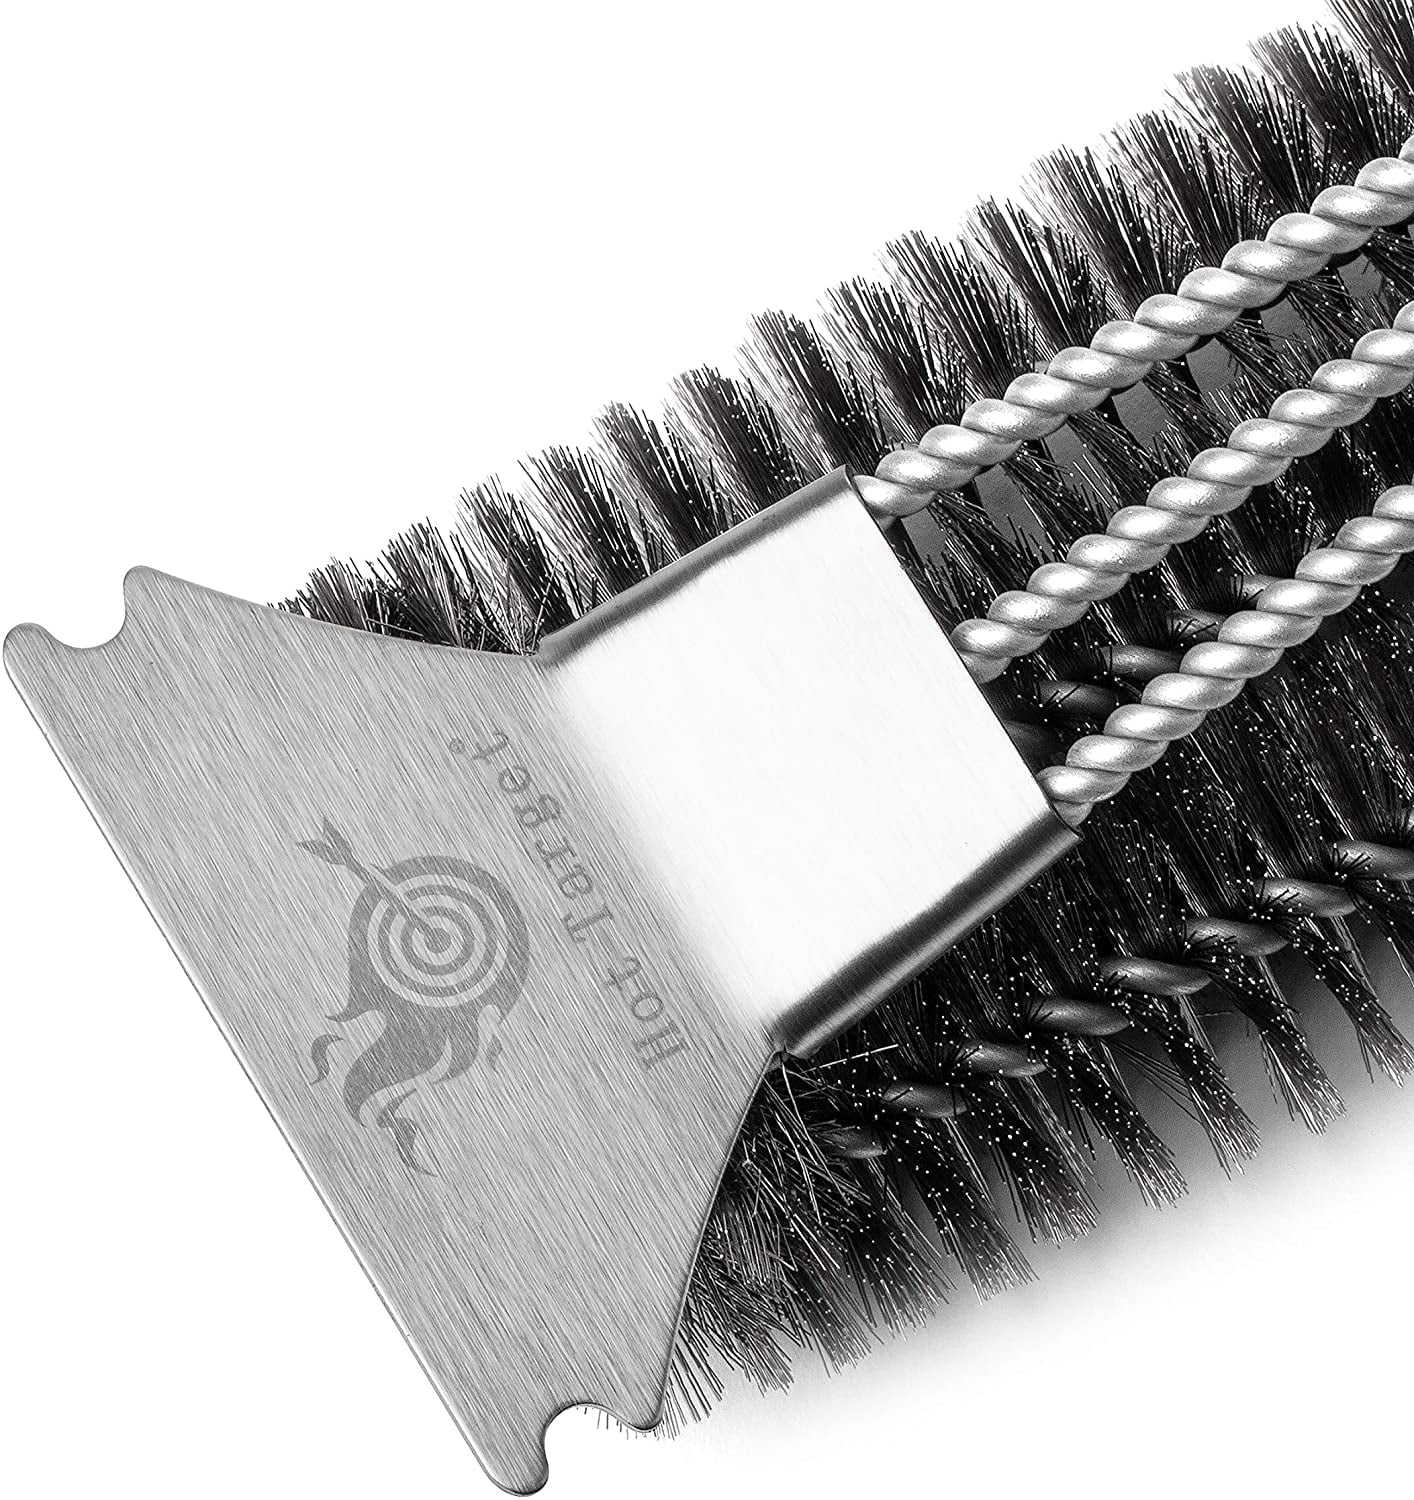 Lux Copper Grill Brush - Outset : Target